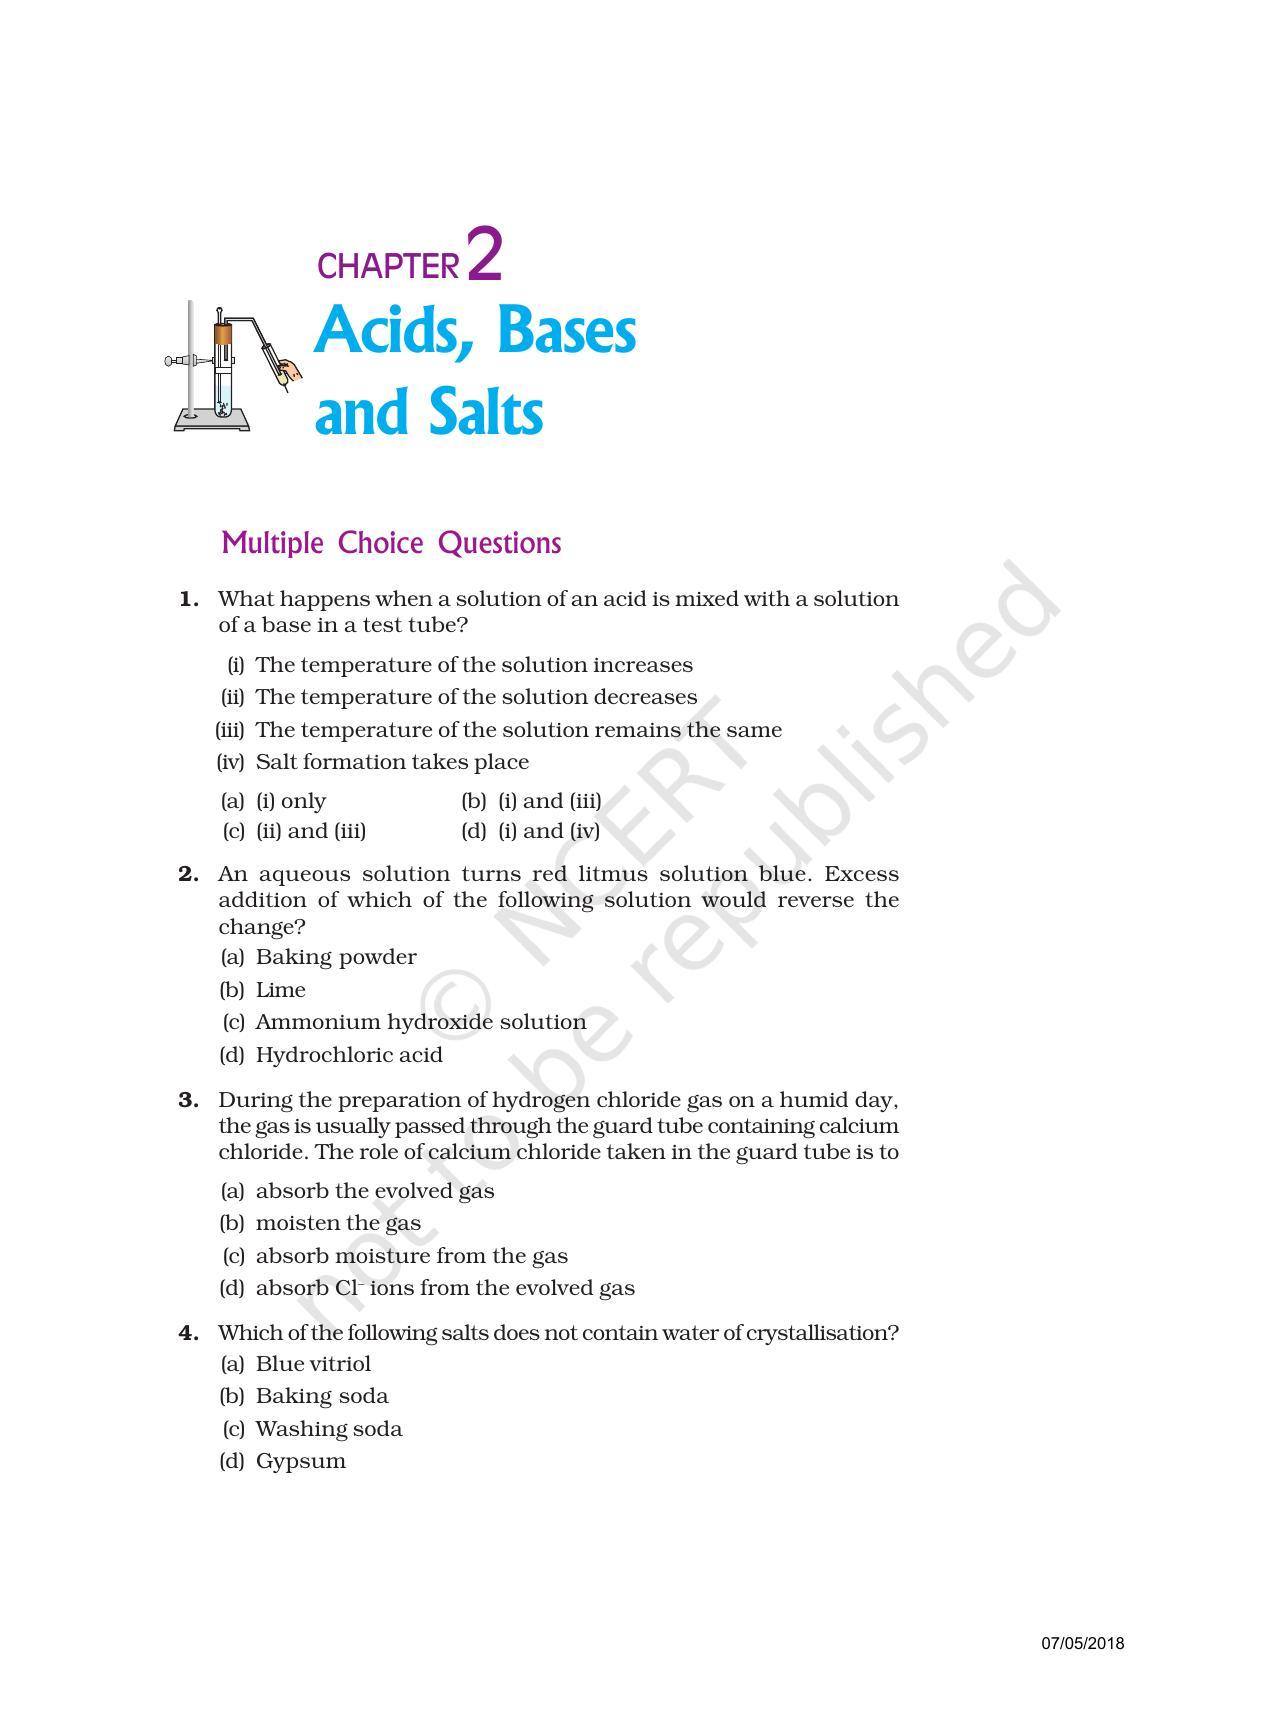 NCERT Exemplar Book for Class 10 Science: Chapter 2 Acids, Bases, and Salts - Page 1